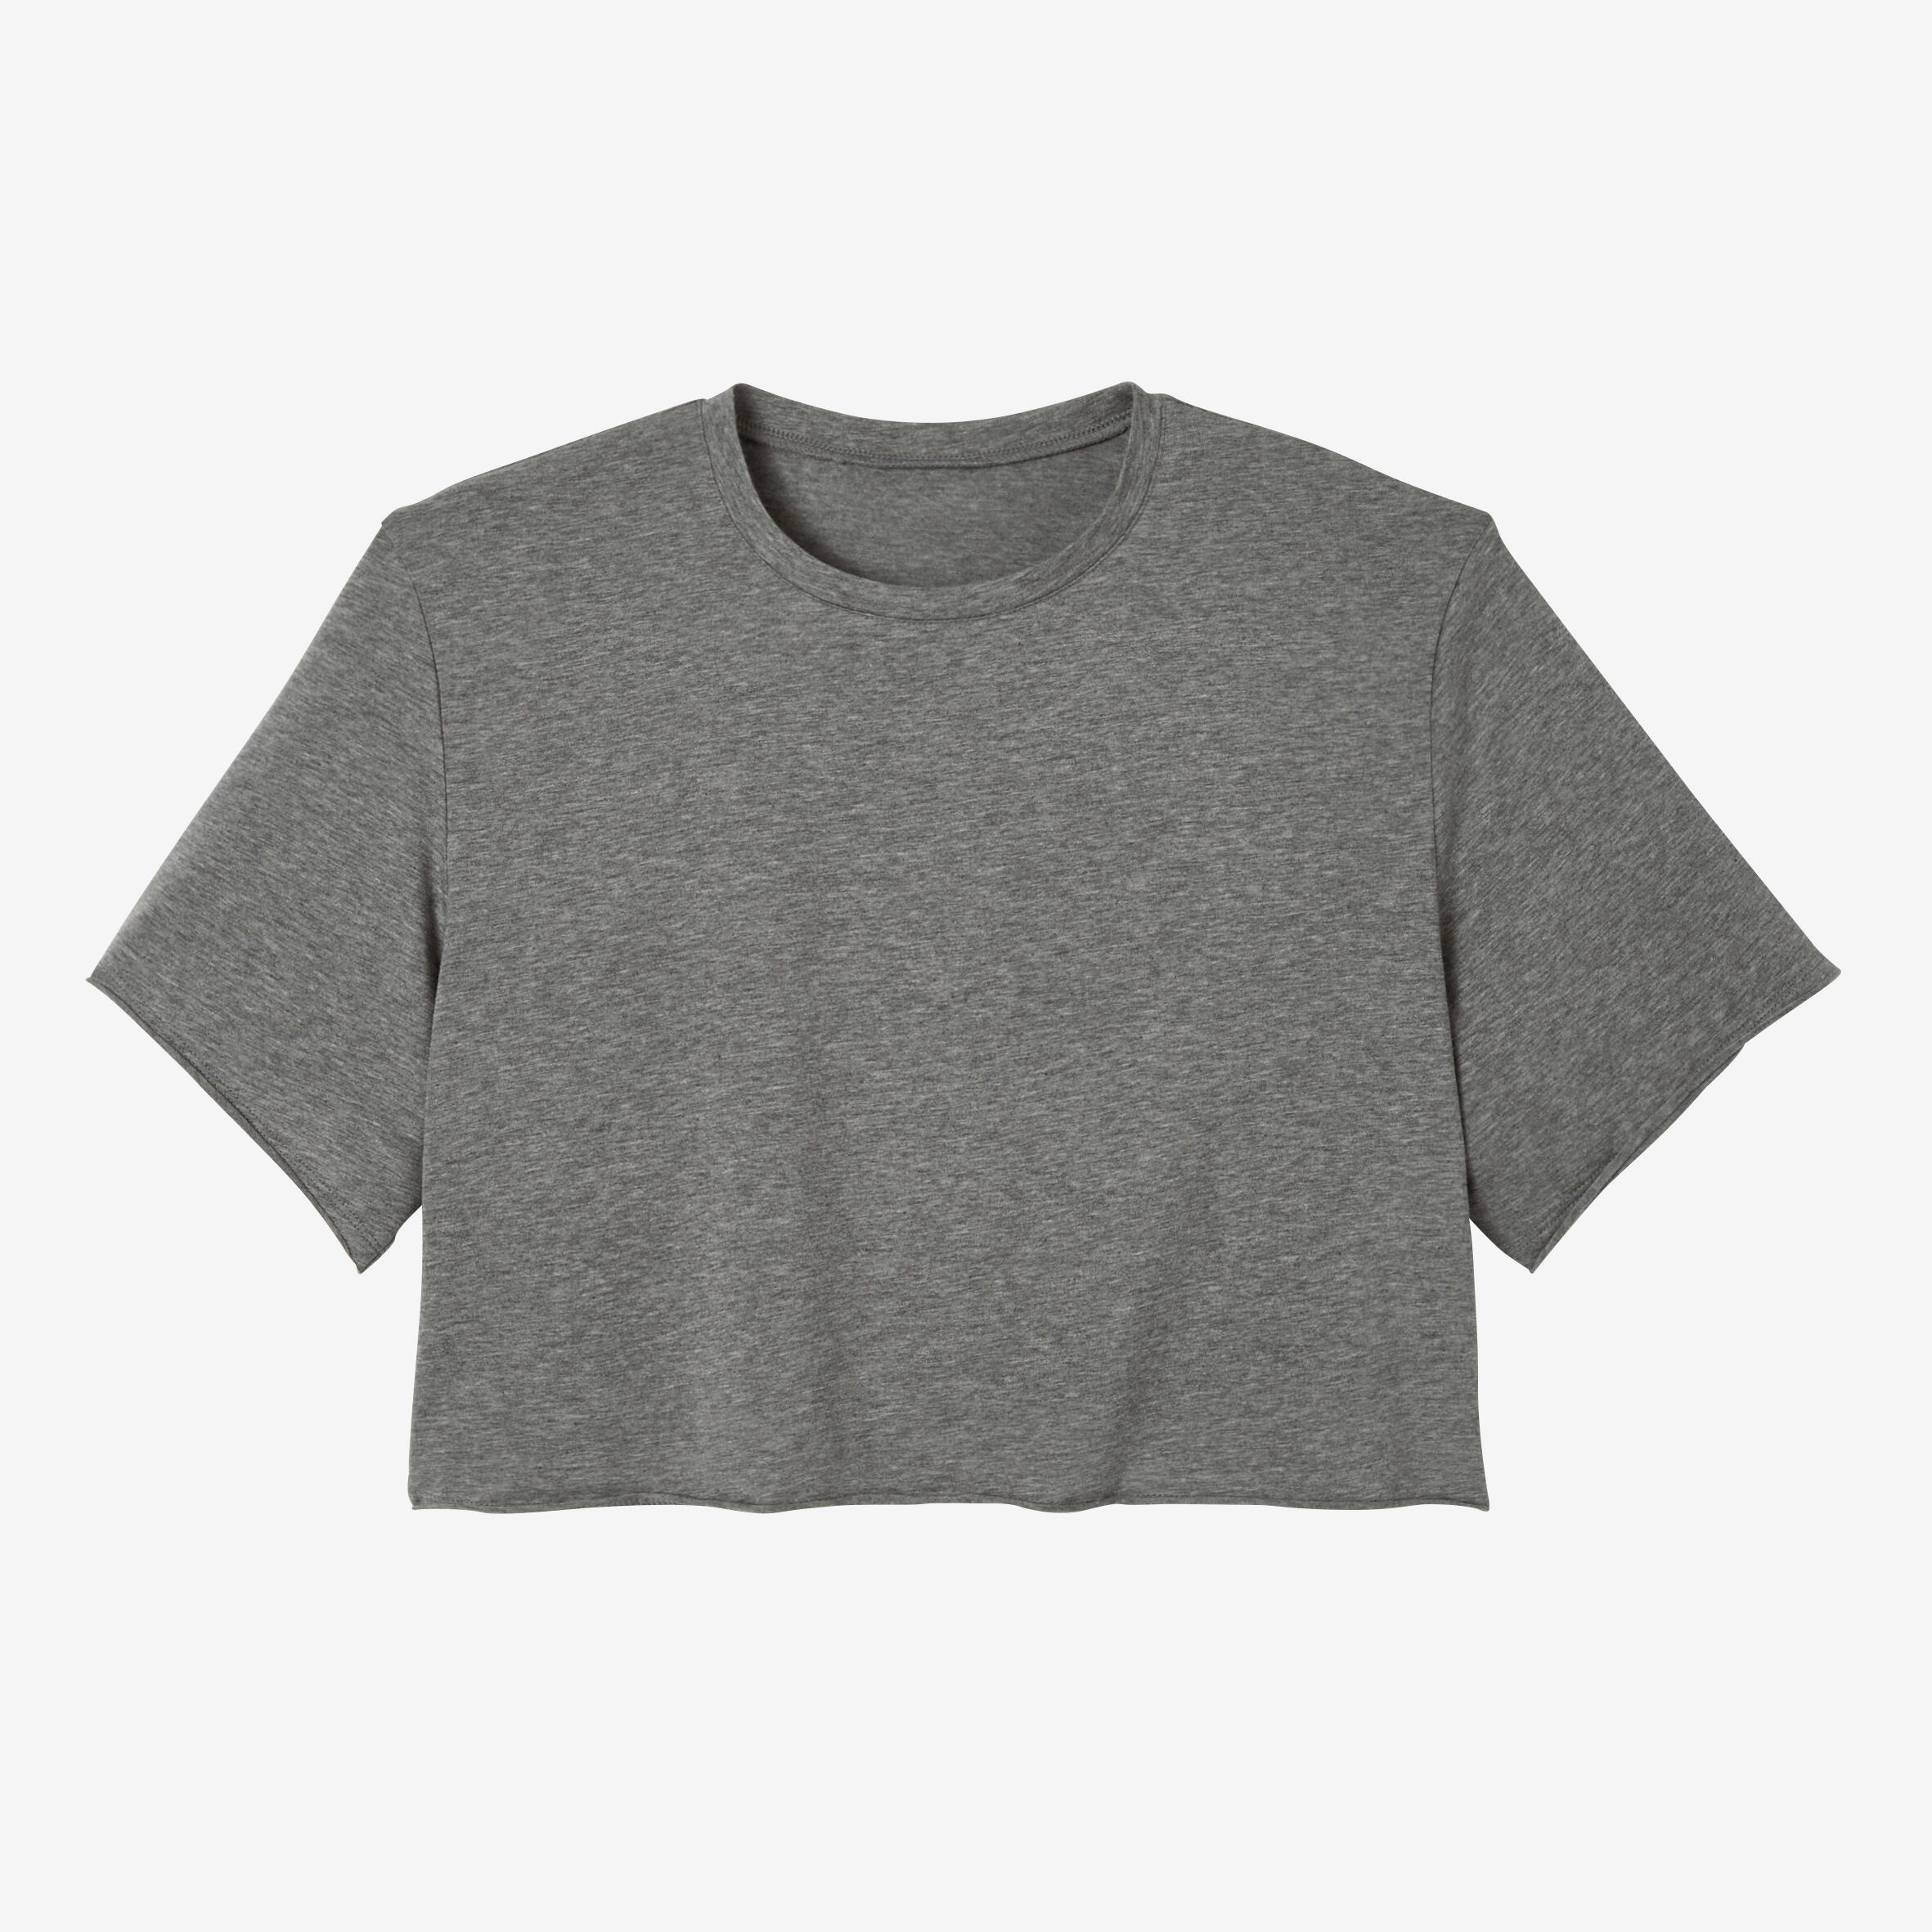 Women's Fitness Cropped T-Shirt 520 - Grey 8/8